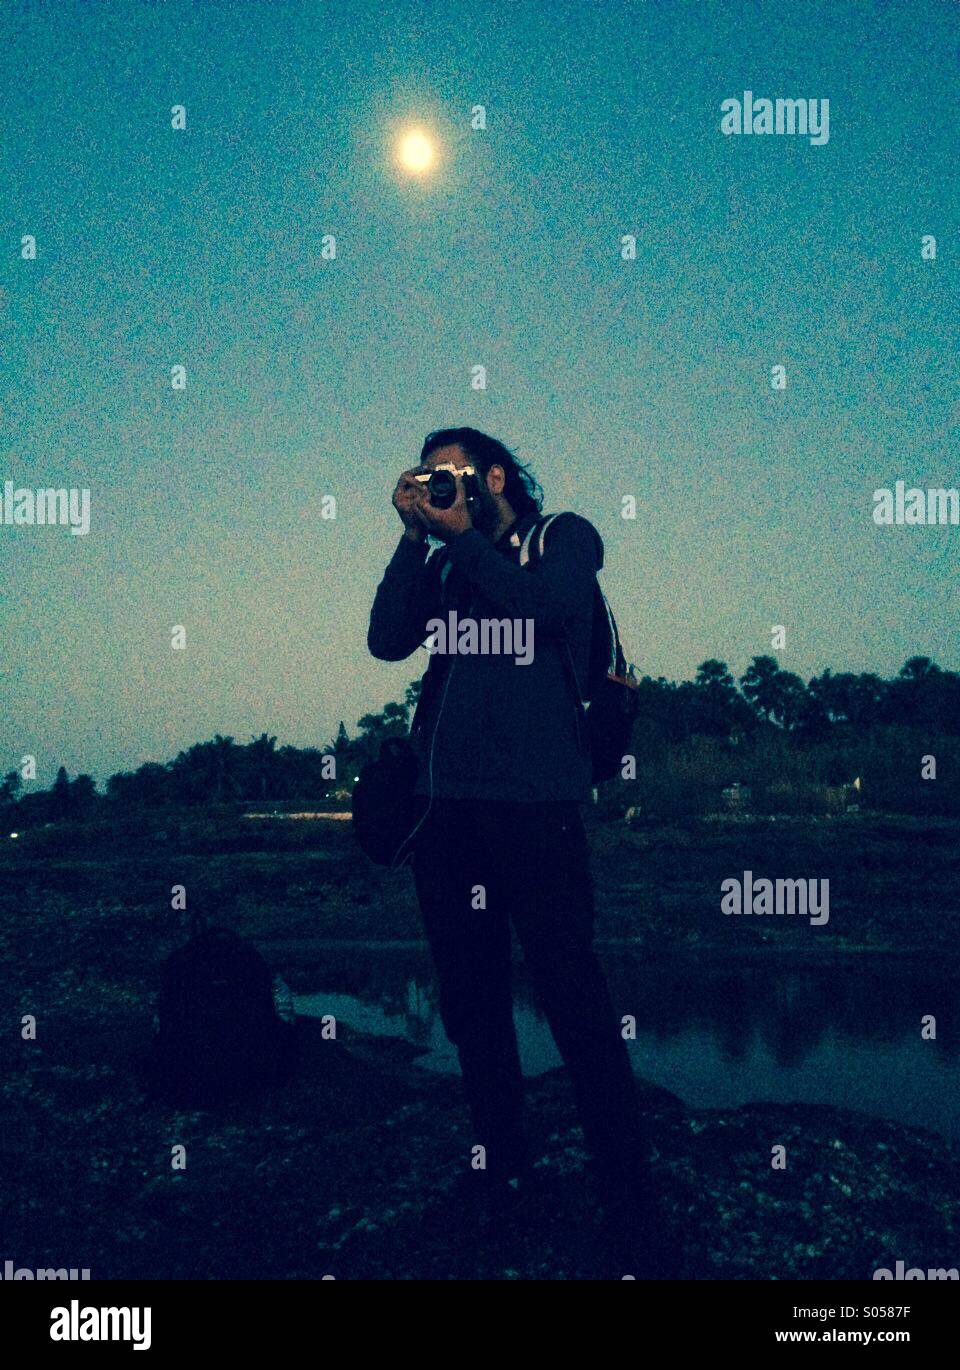 A man clicking photos at the seaside with the moon in the background Stock Photo